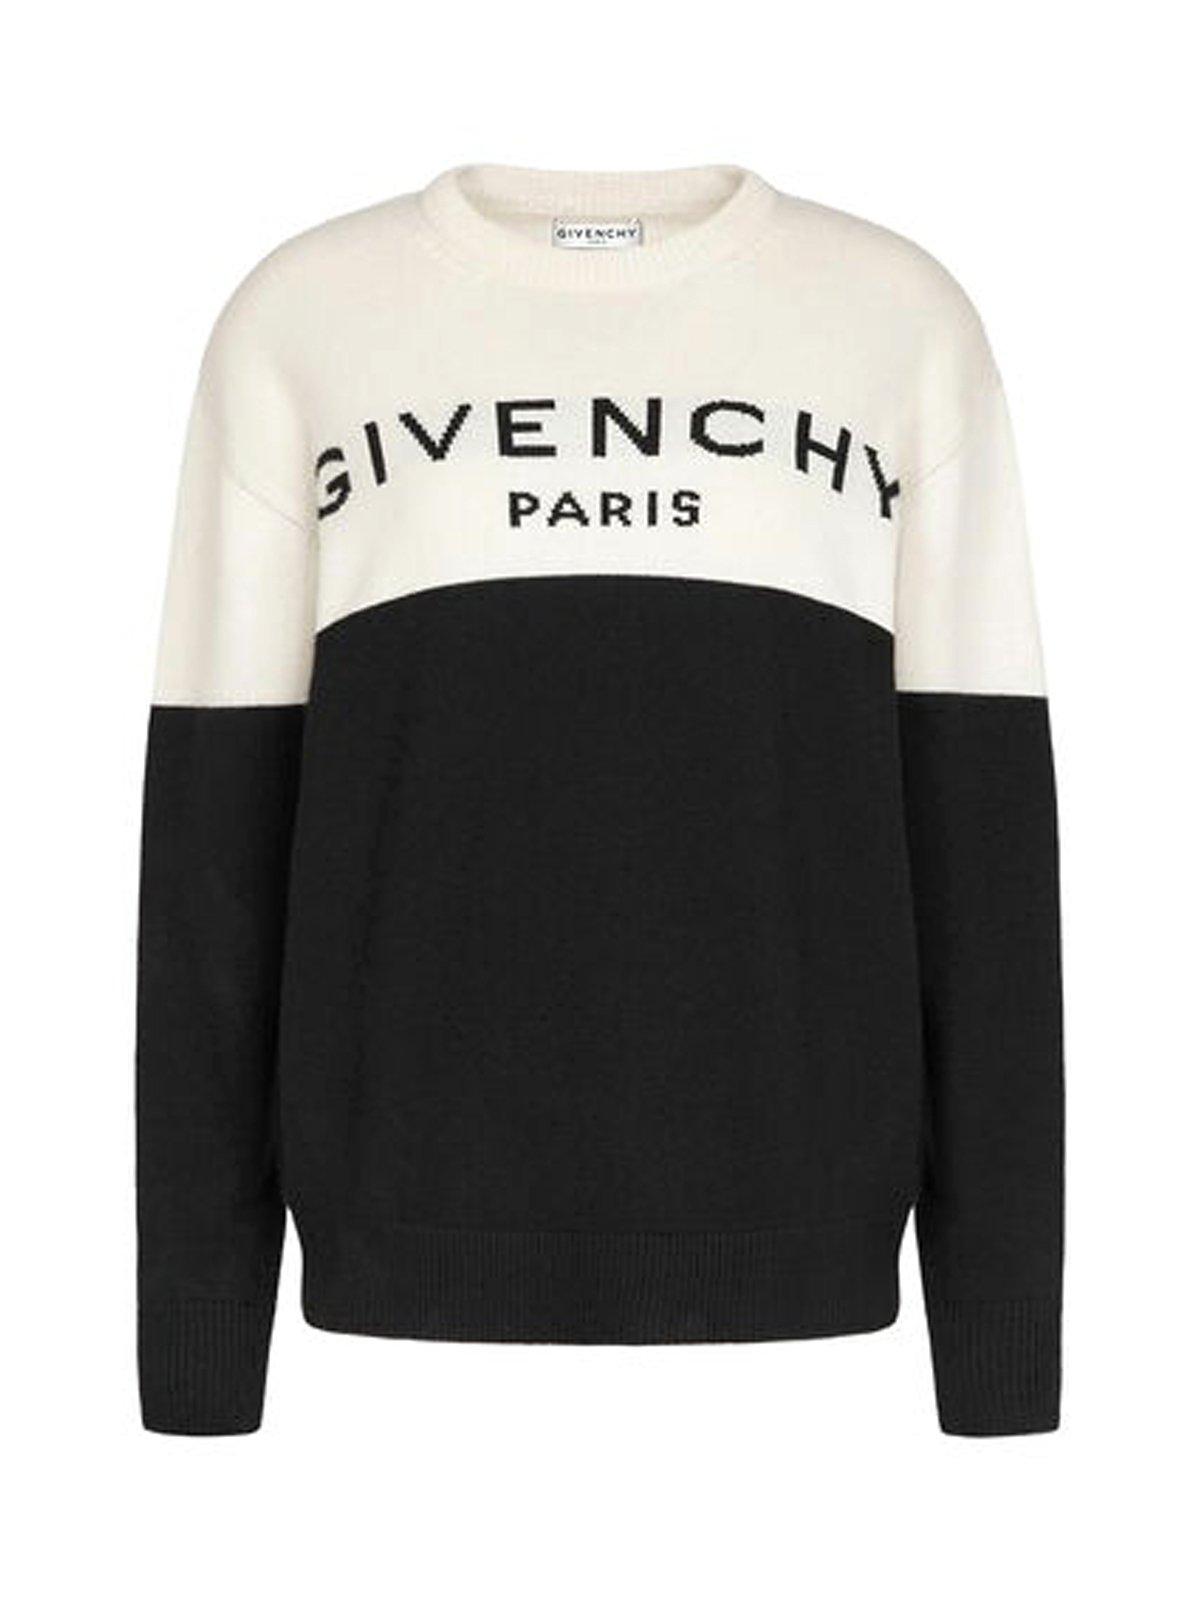 Givenchy Two-tone Intarsia Cashmere Sweater in Black | Lyst